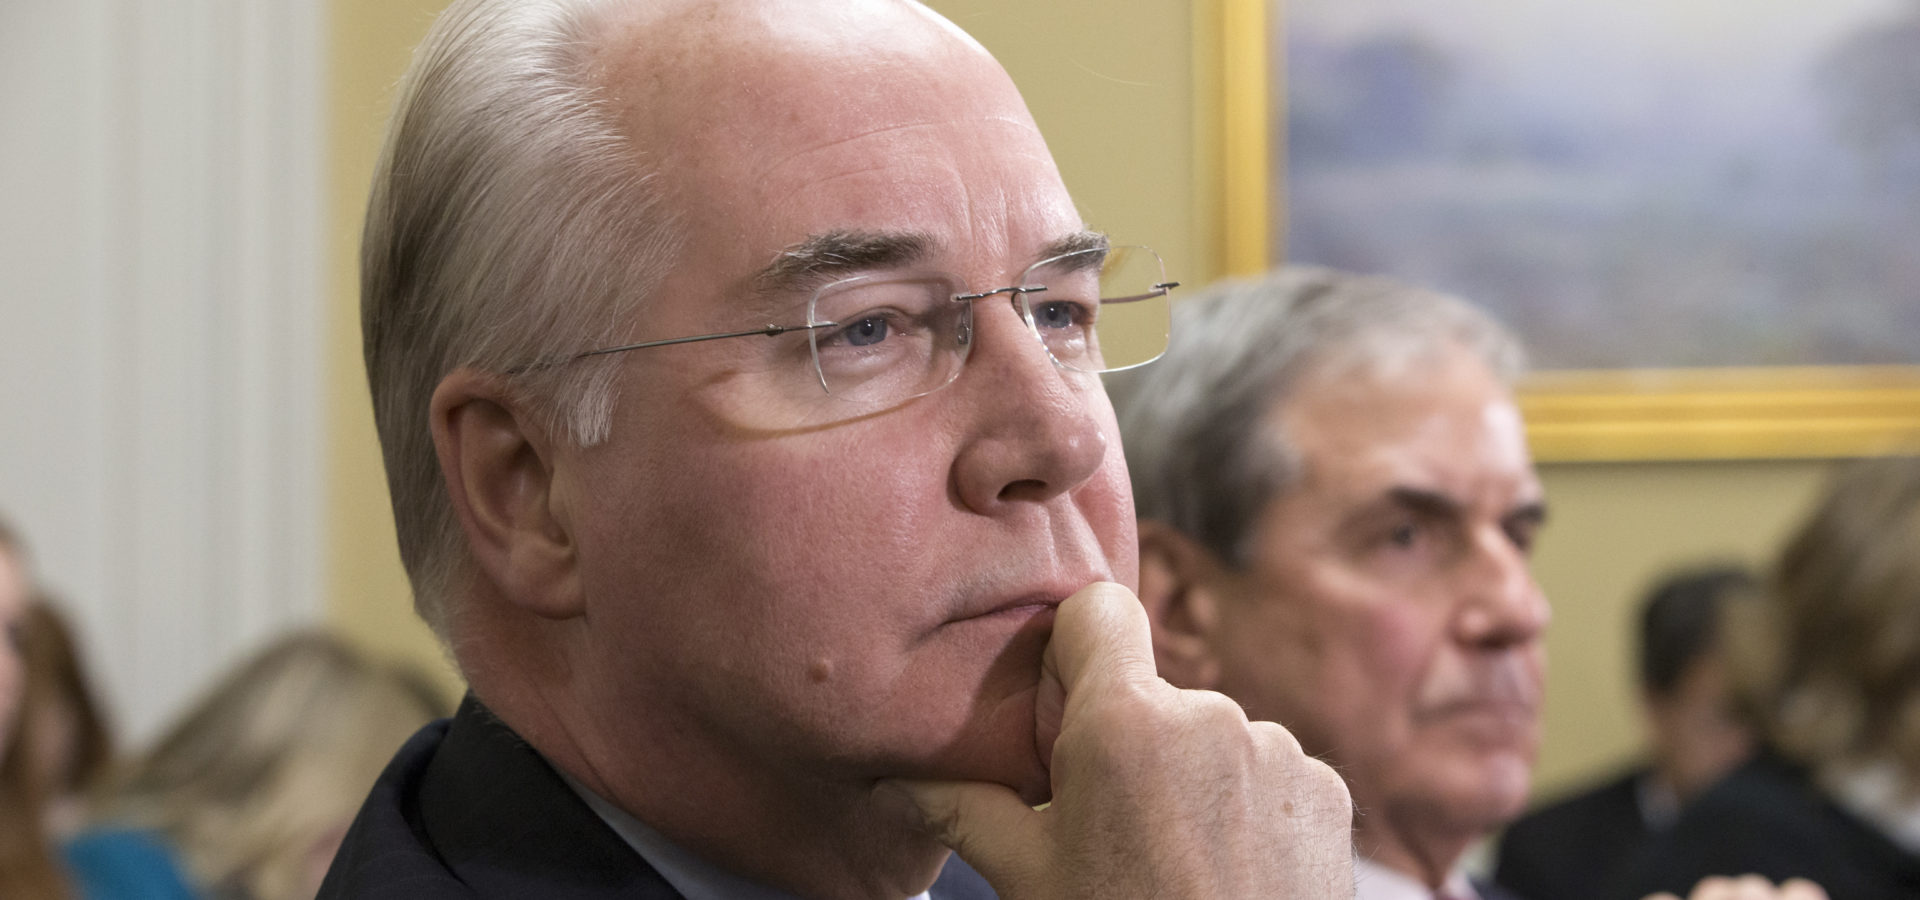 Rep. Tom Price, R-Ga., chairman of the House Budget Committee appears before the Rules Committee on Capitol Hill in Washington. Republicans hope that as Trump's choice to run the Department of Health and Human Services, Price will preside over the dismantlement of President Barack Obama's signature health care law. (AP Photo/J. Scott Applewhite, File)